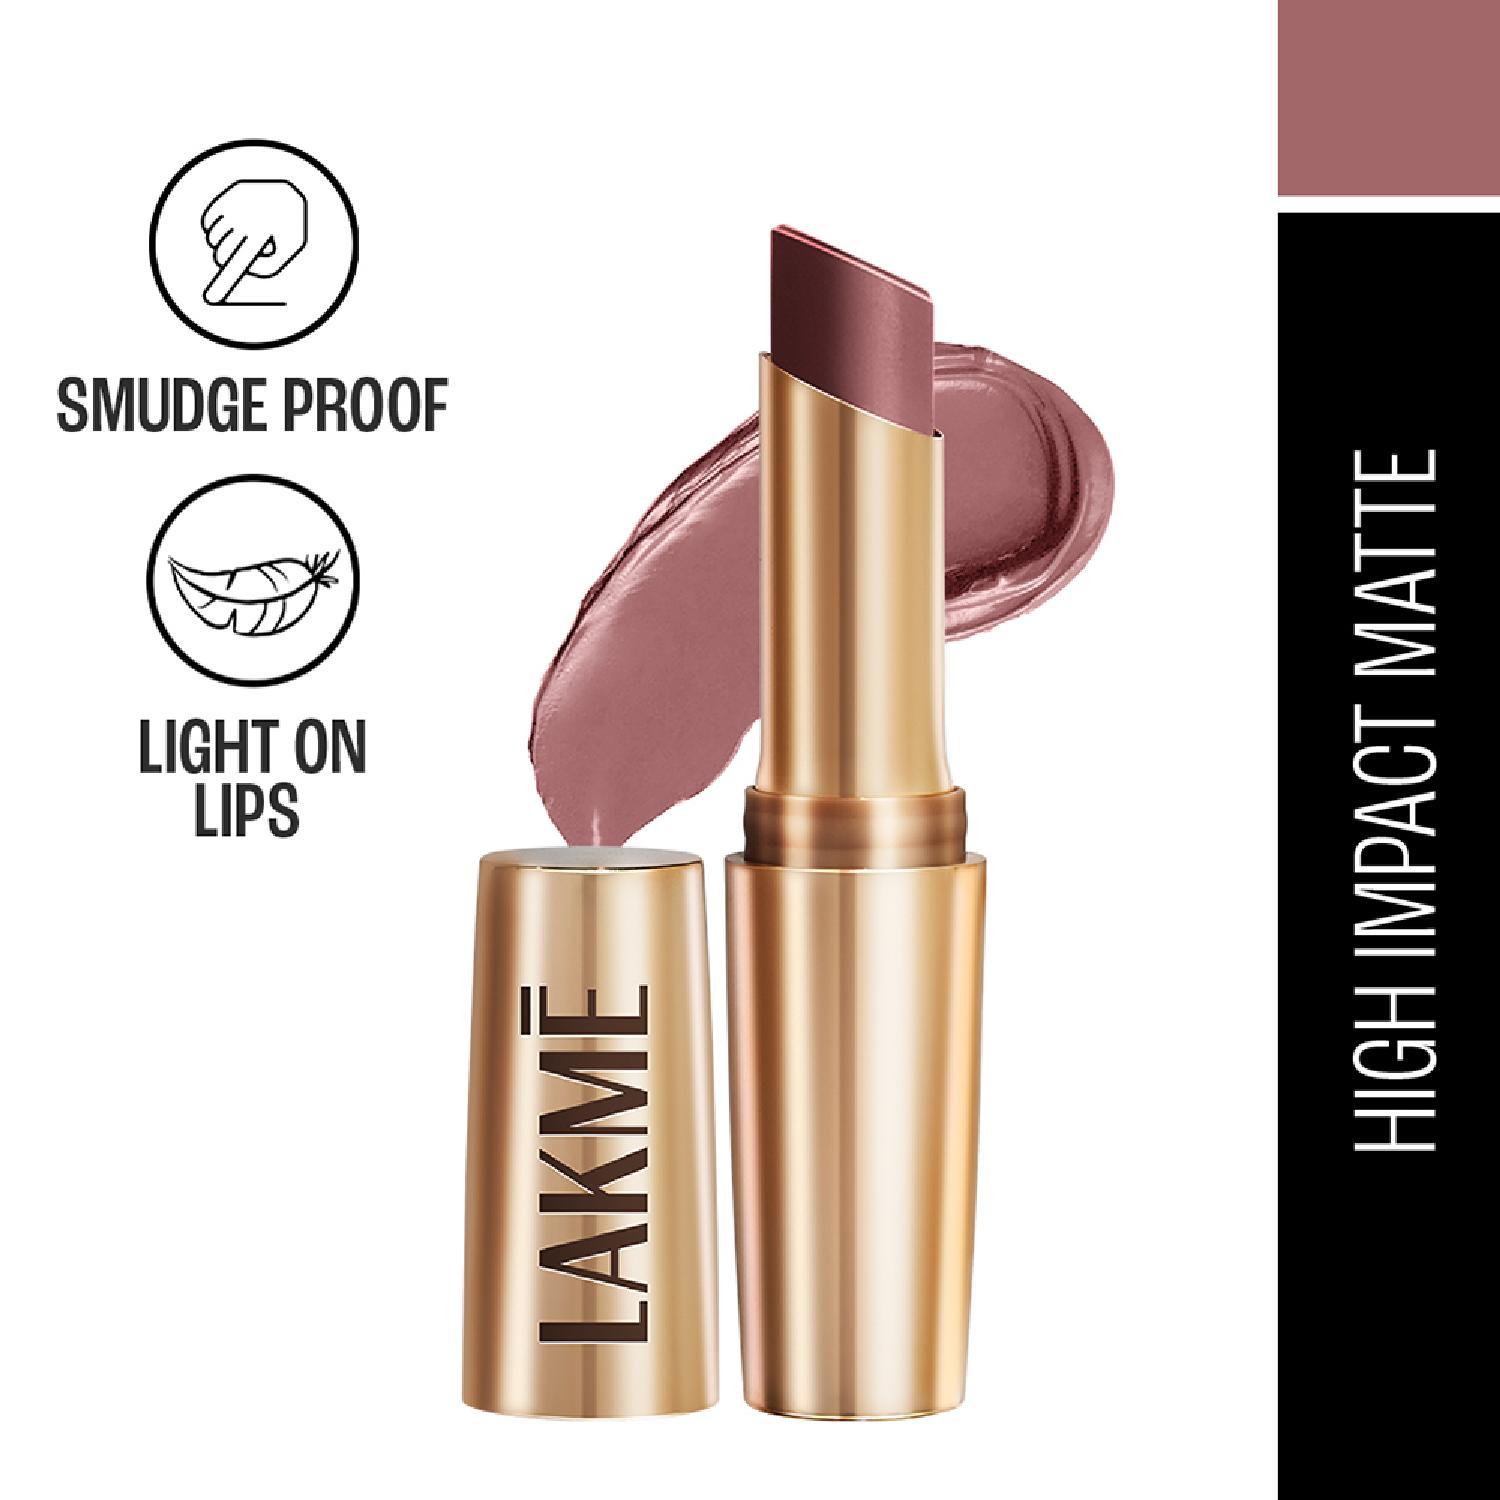 Lakme | Lakme 9 to 5 Powerplay Priming Matte Lipstick, Lasts 16hrs, Dusty Pink (3.6g)